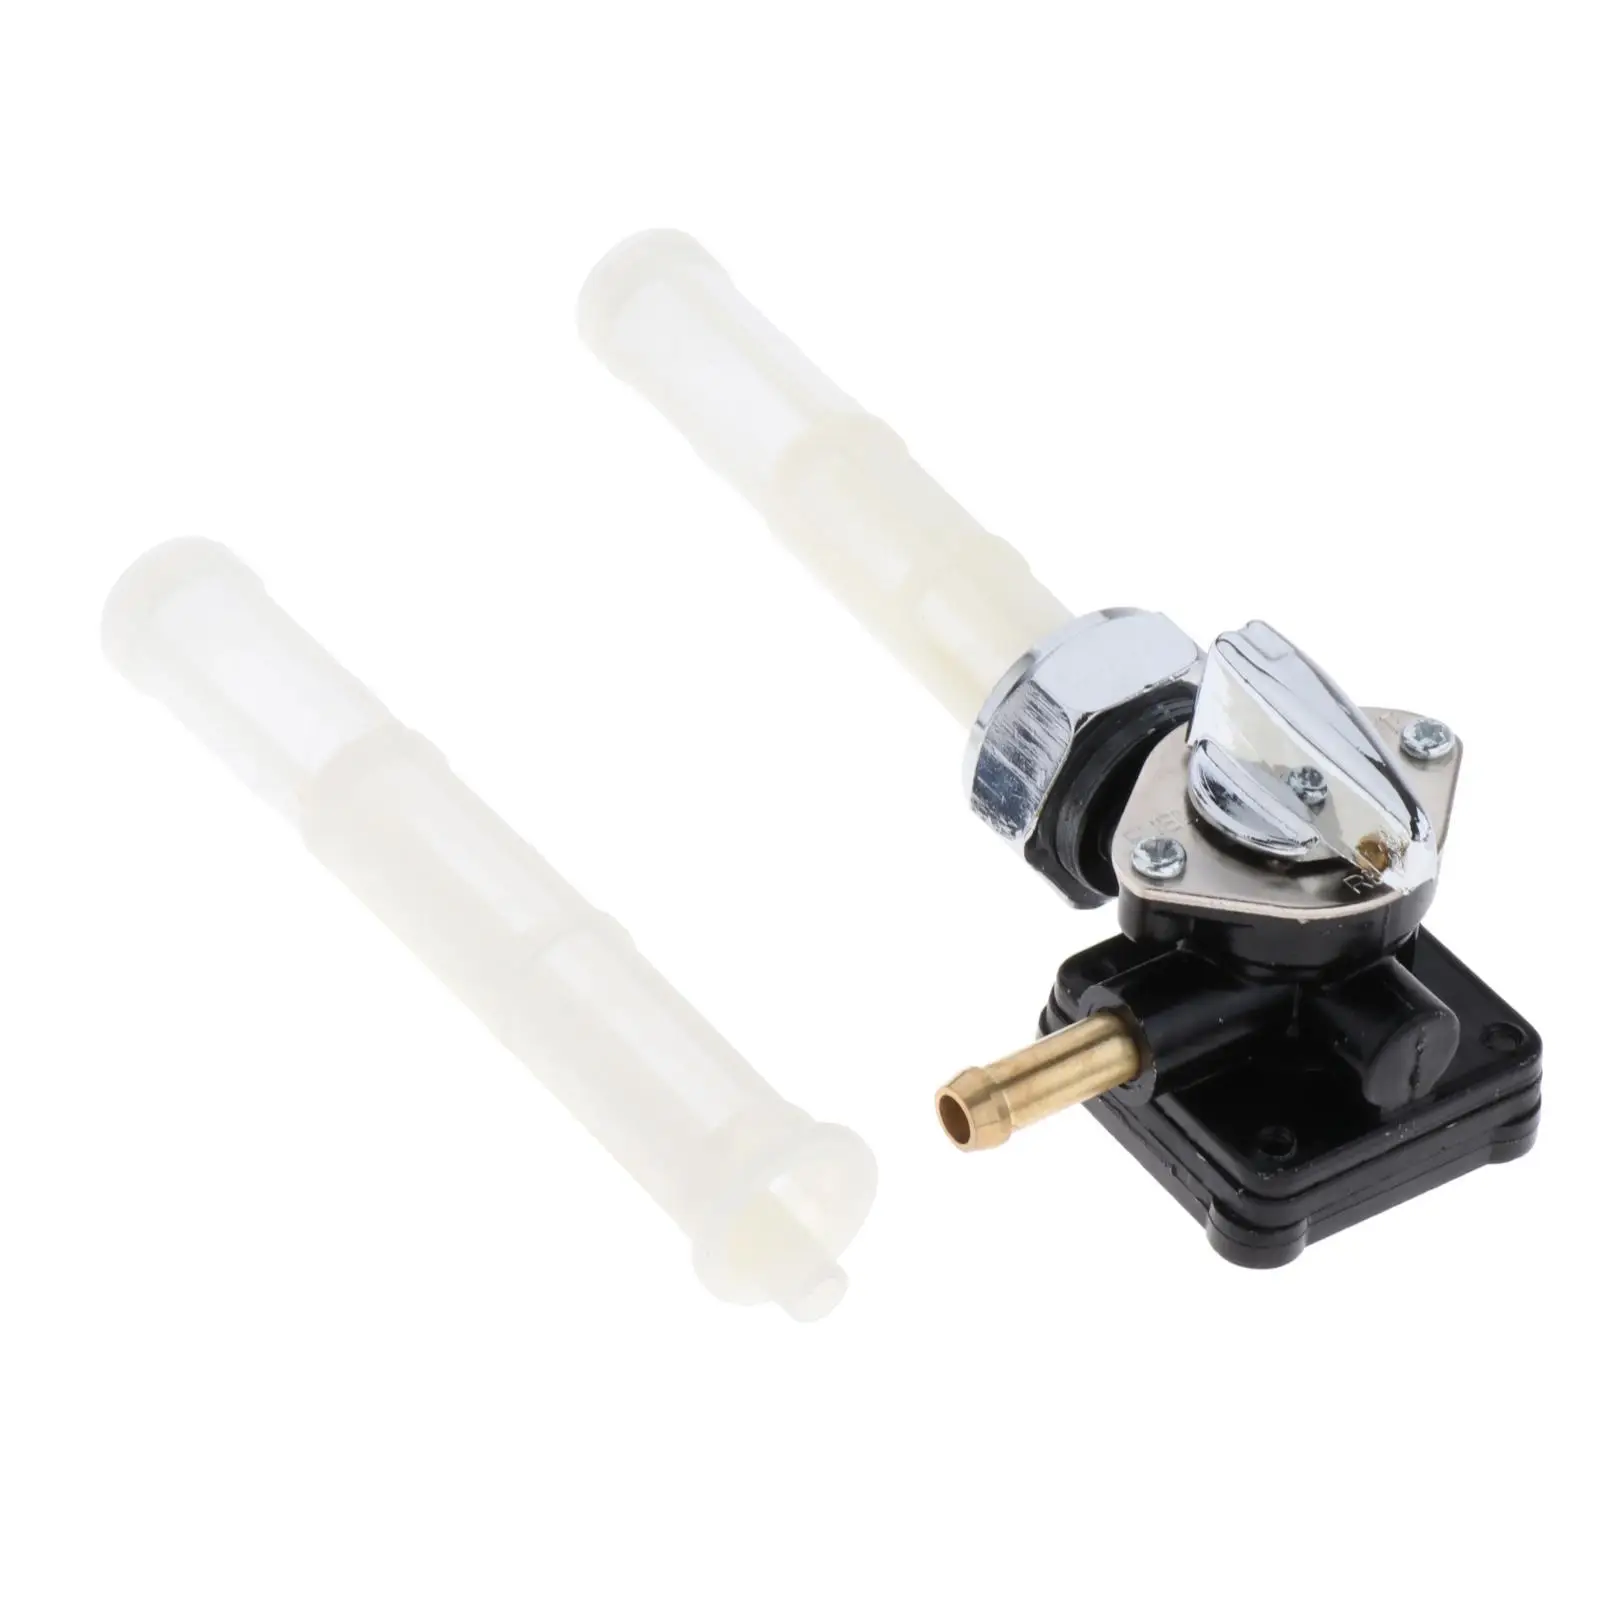 Fuel Switch Valve Petcock  with Filter Mesh 61338 Shut Off Switch for Flst Replacement  Supplies Parts